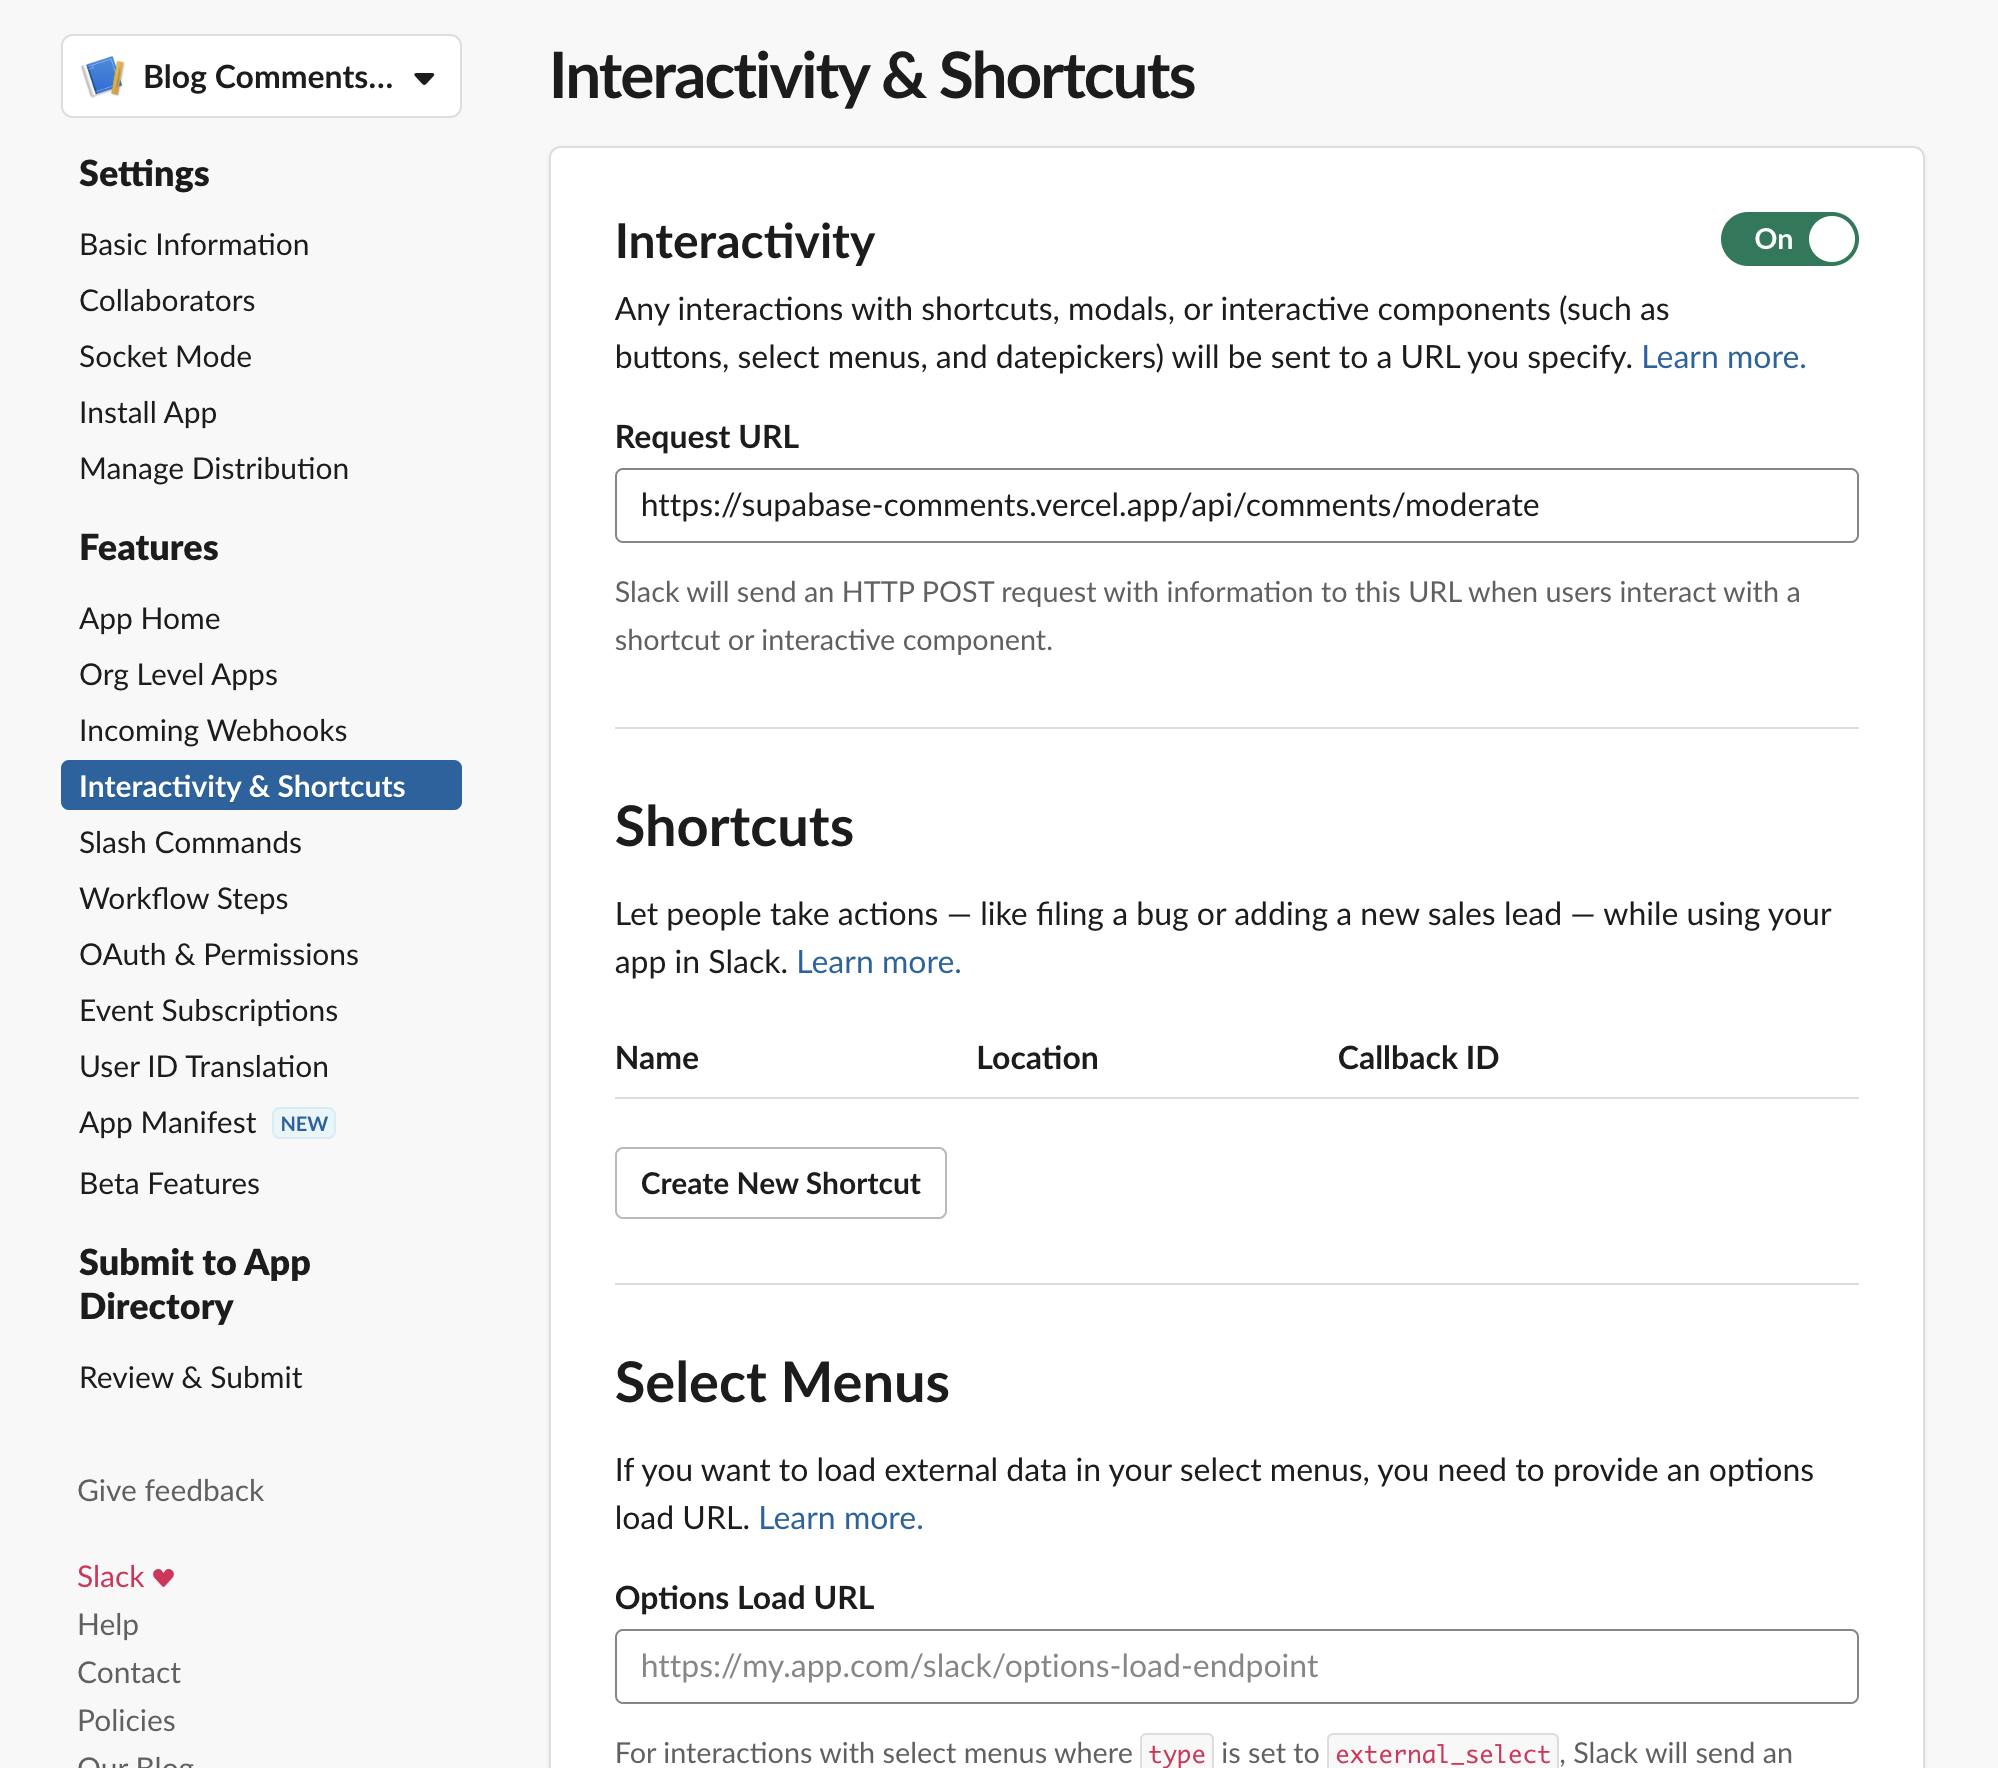 An image of interactivity and shortcuts in Slack.